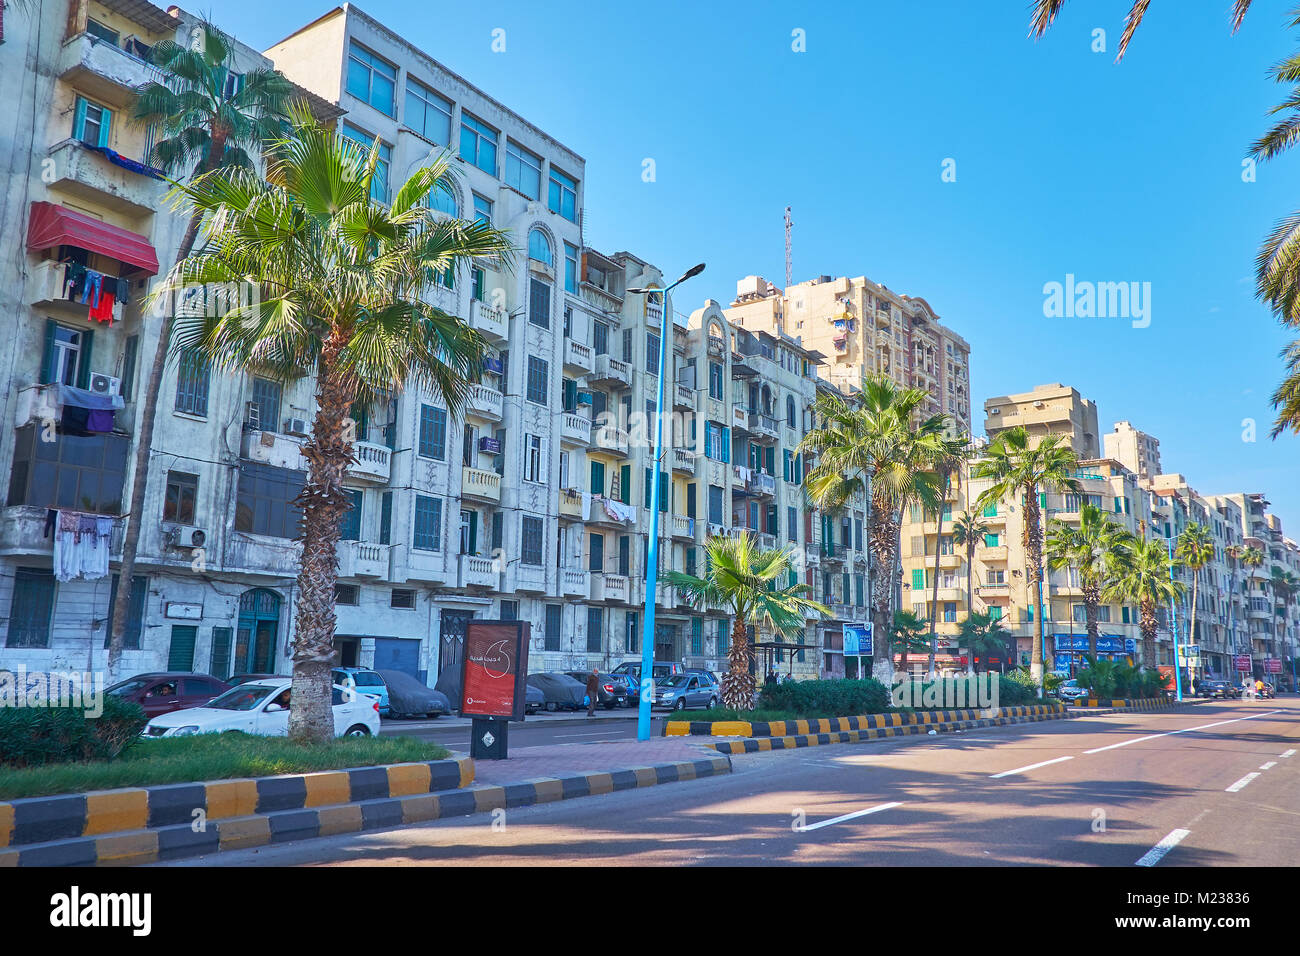 ALEXANDRIA, EGYPT - DECEMBER 17, 2017: The row of residential buildings in Corniche avenue, one of the most popular city locations, stretching along t Stock Photo